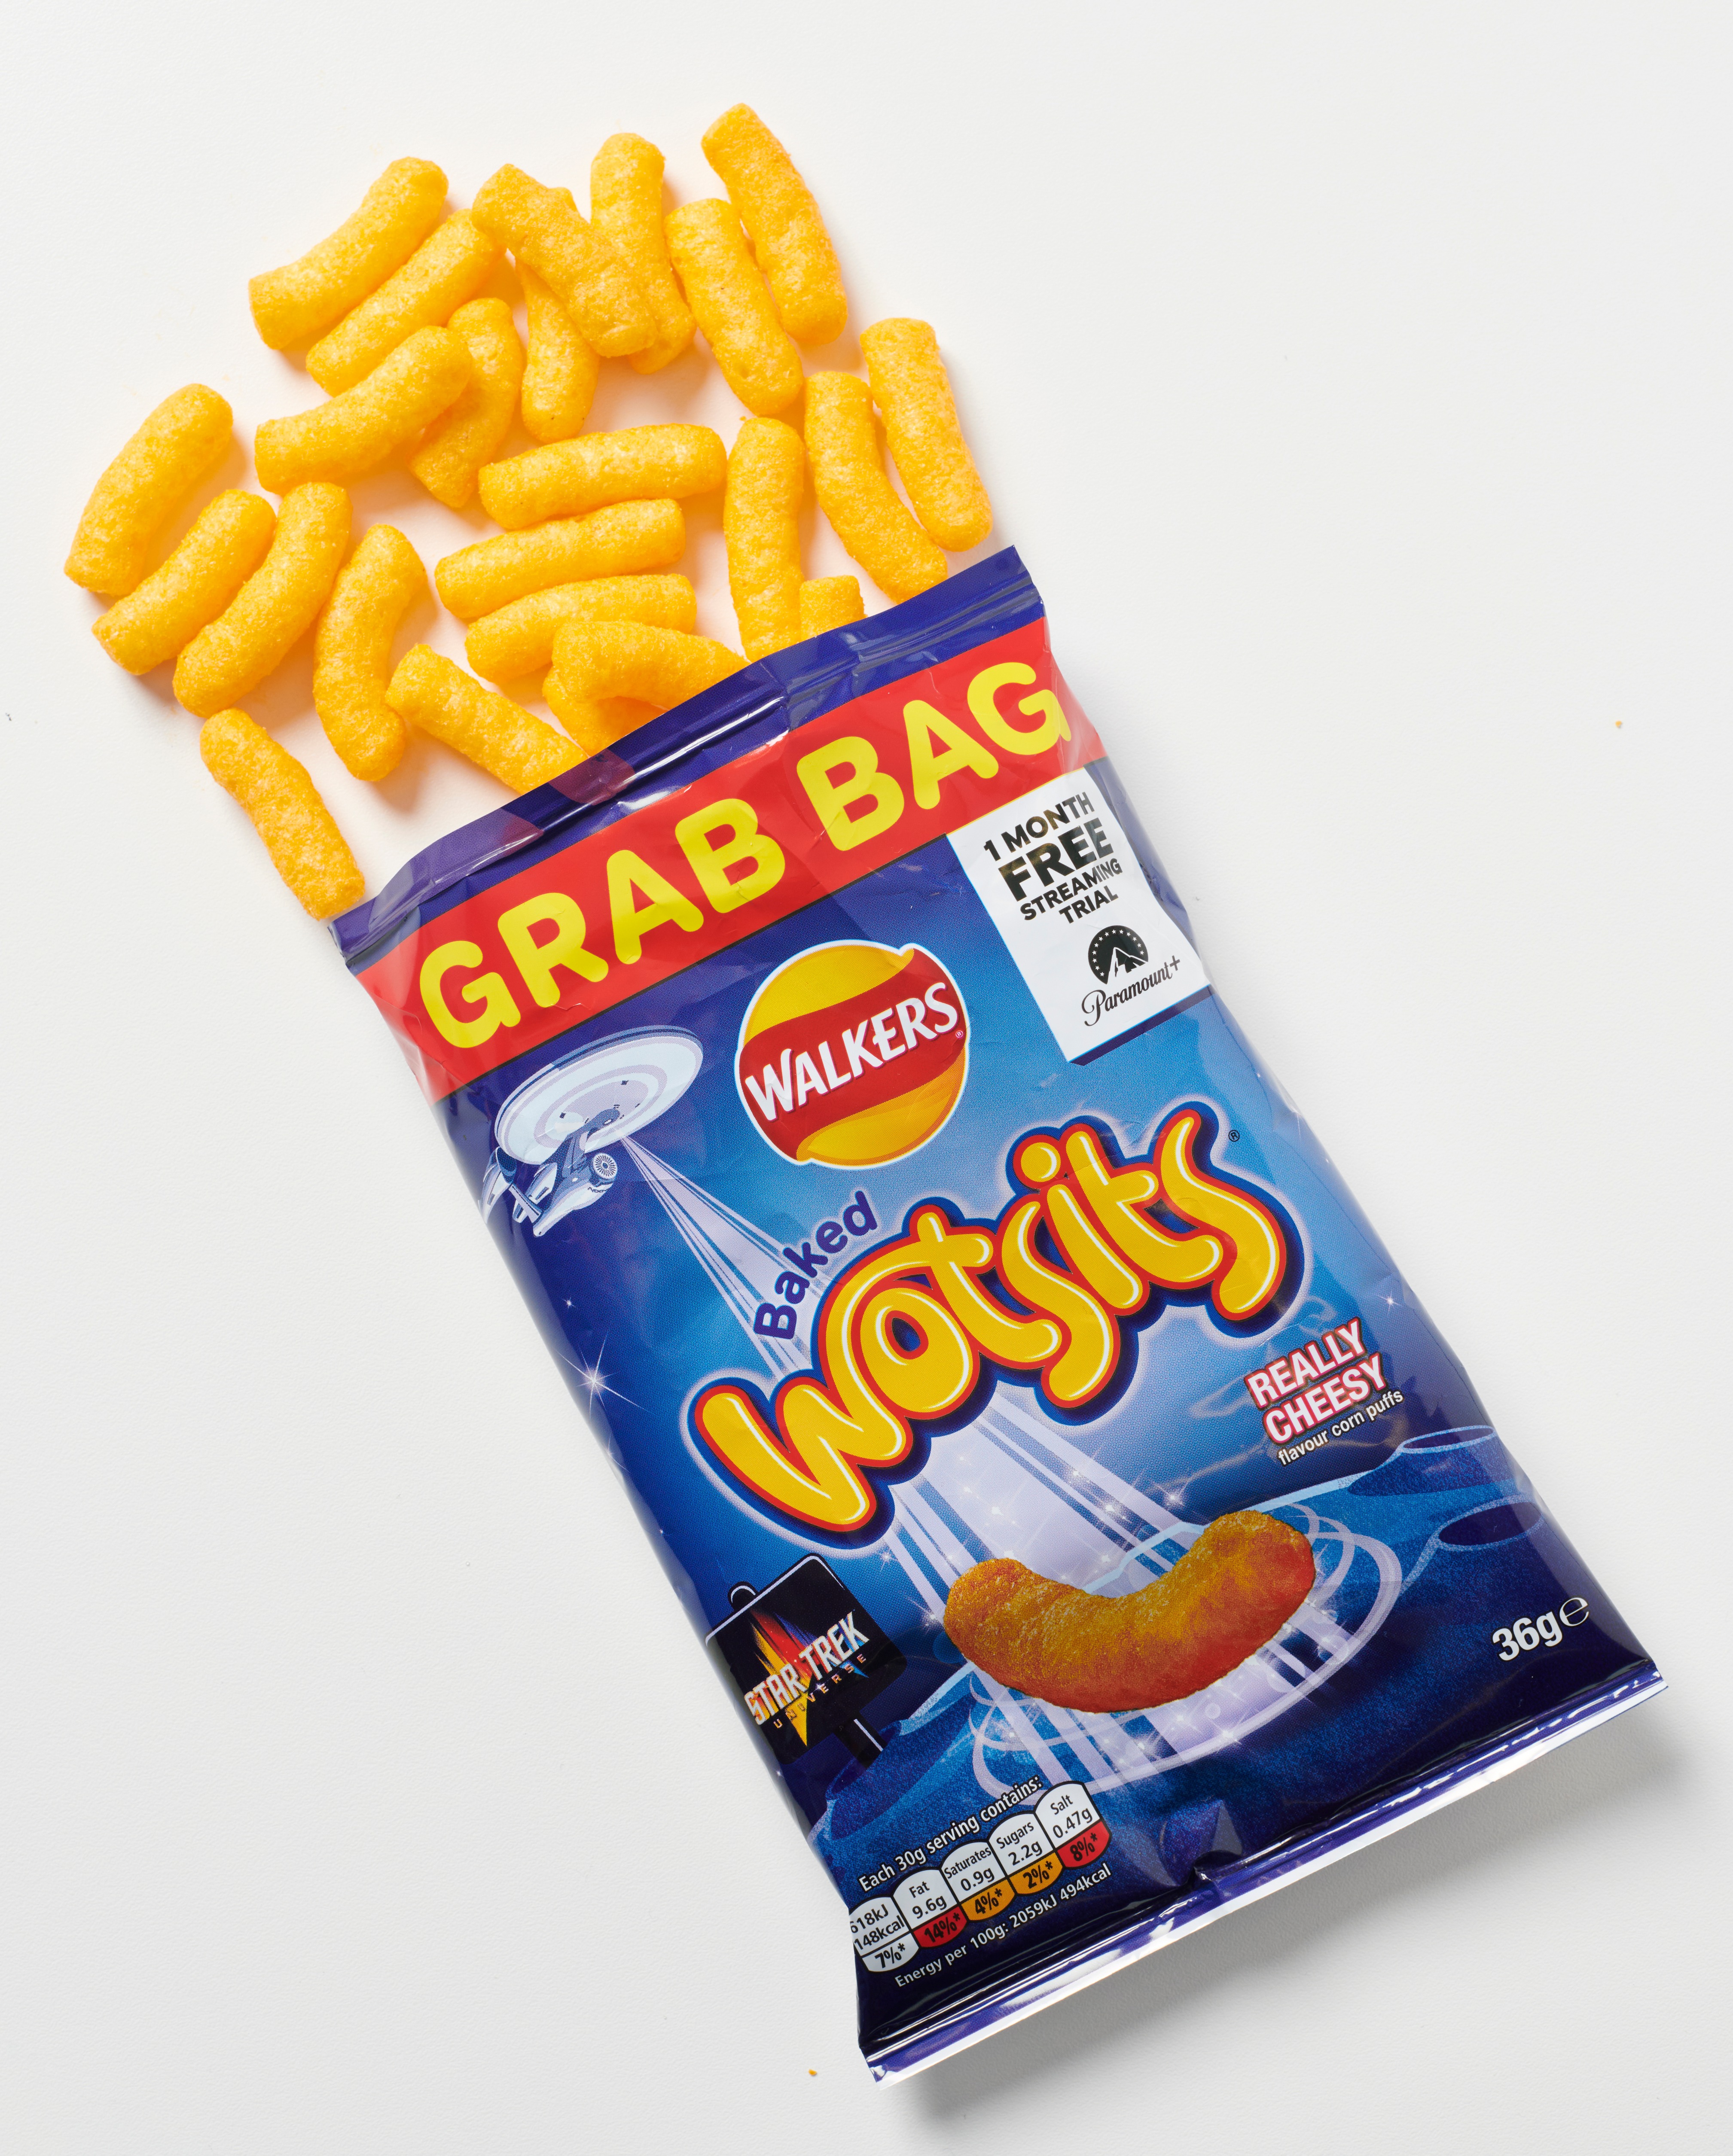 Lucy used curry and rice, served with Wotsits as a safe food, as an example